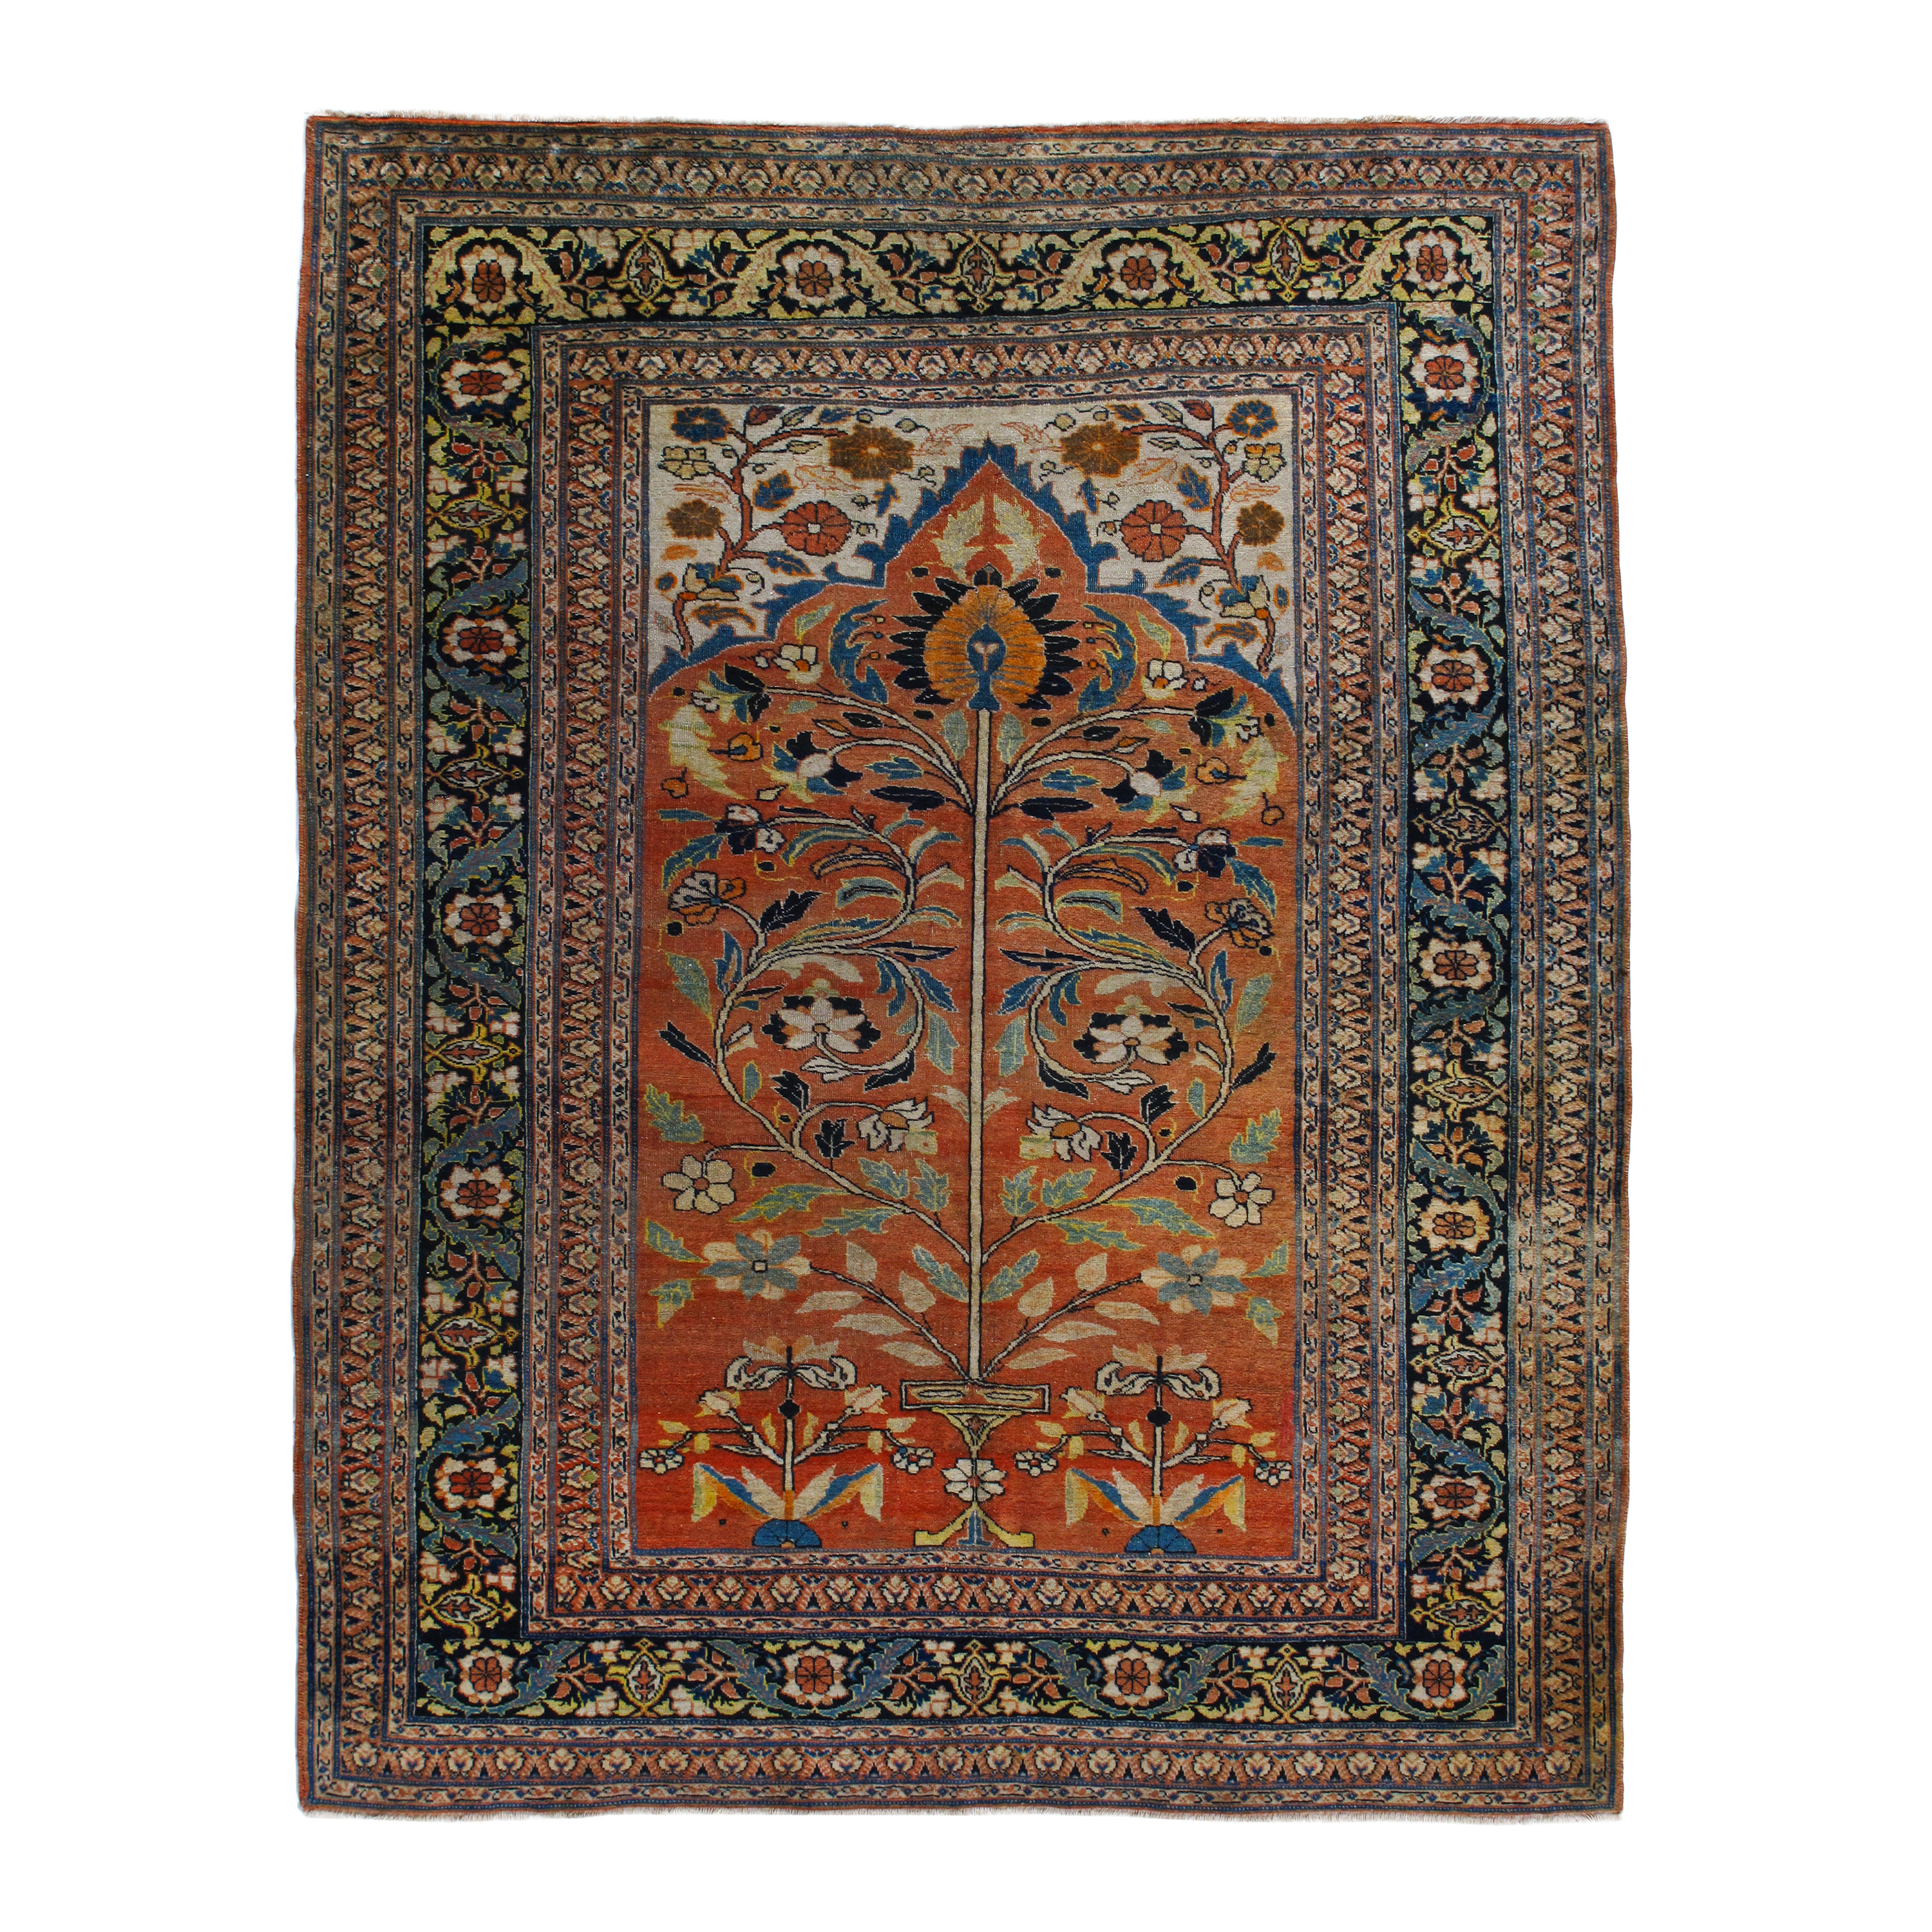 This antique Tabriz rug is hand-knotted and made of wool.